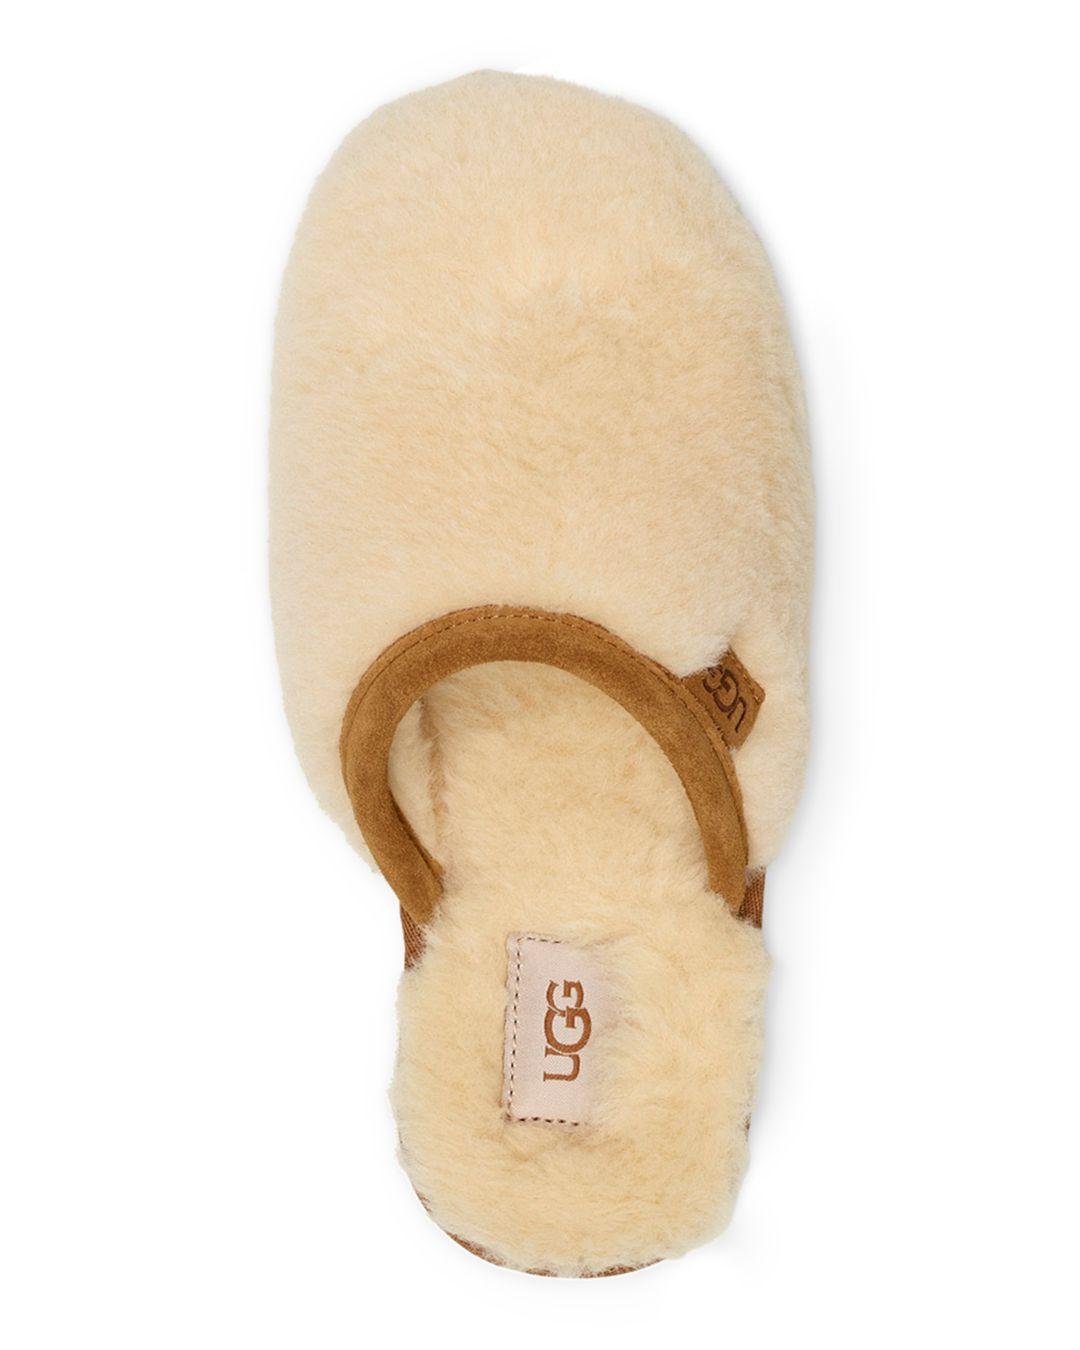 UGG Women's Fluffette Slippers in Natural | Lyst